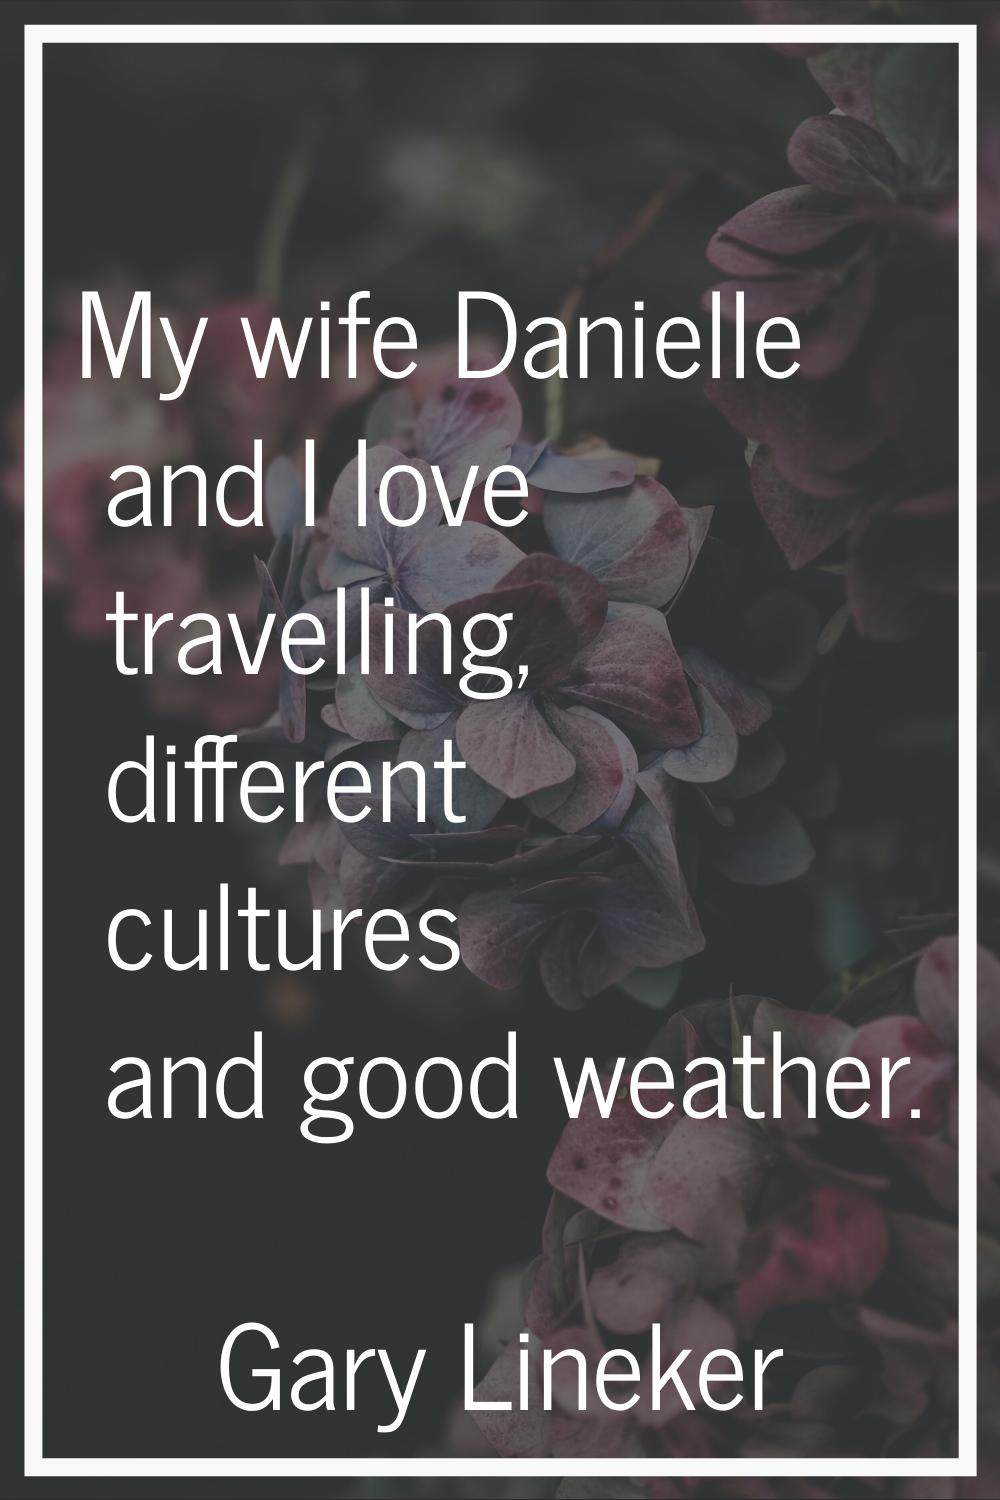 My wife Danielle and I love travelling, different cultures and good weather.